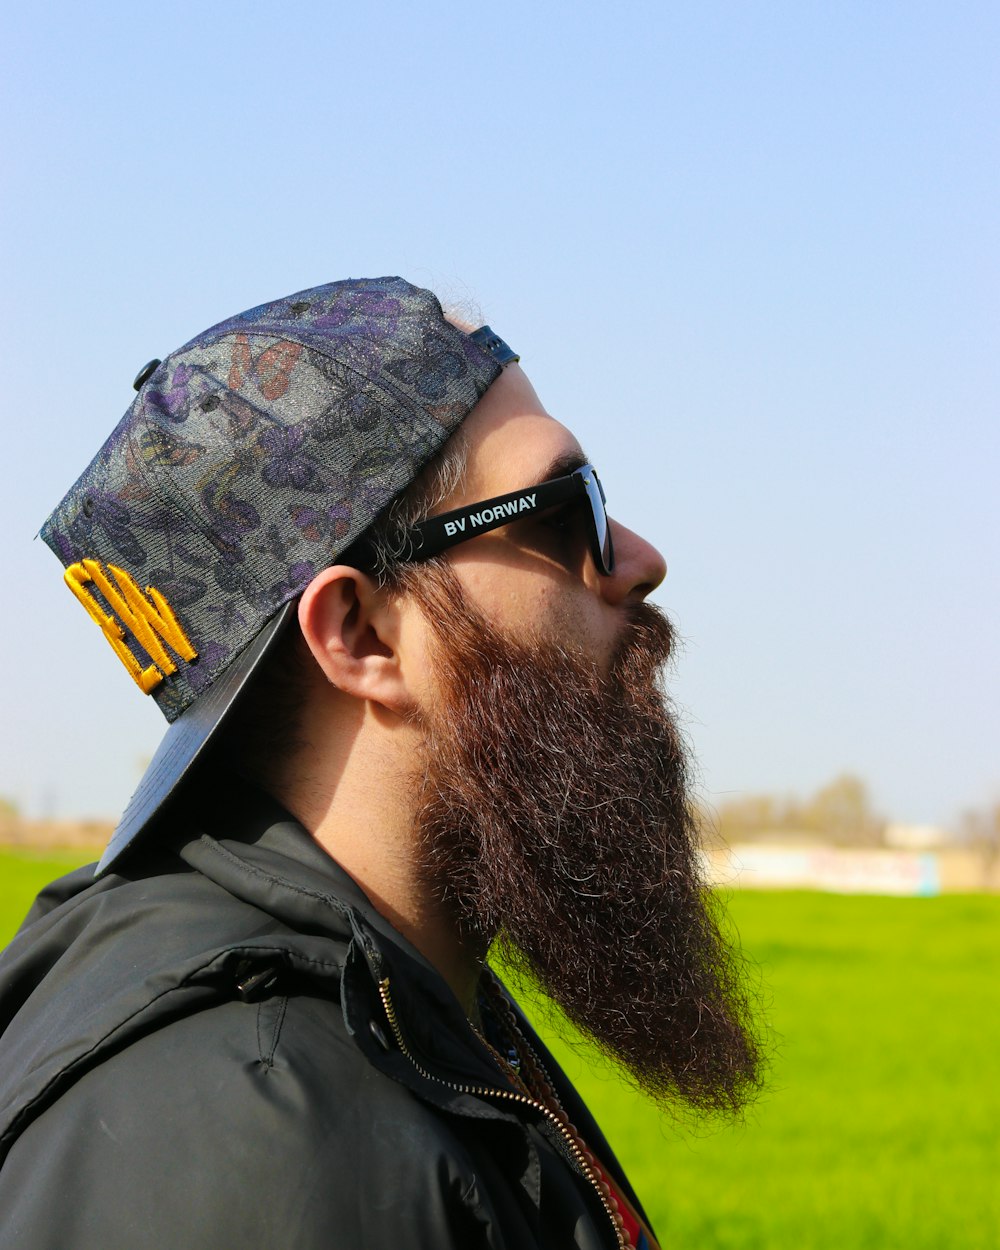 a man with a long beard wearing sunglasses and a hat